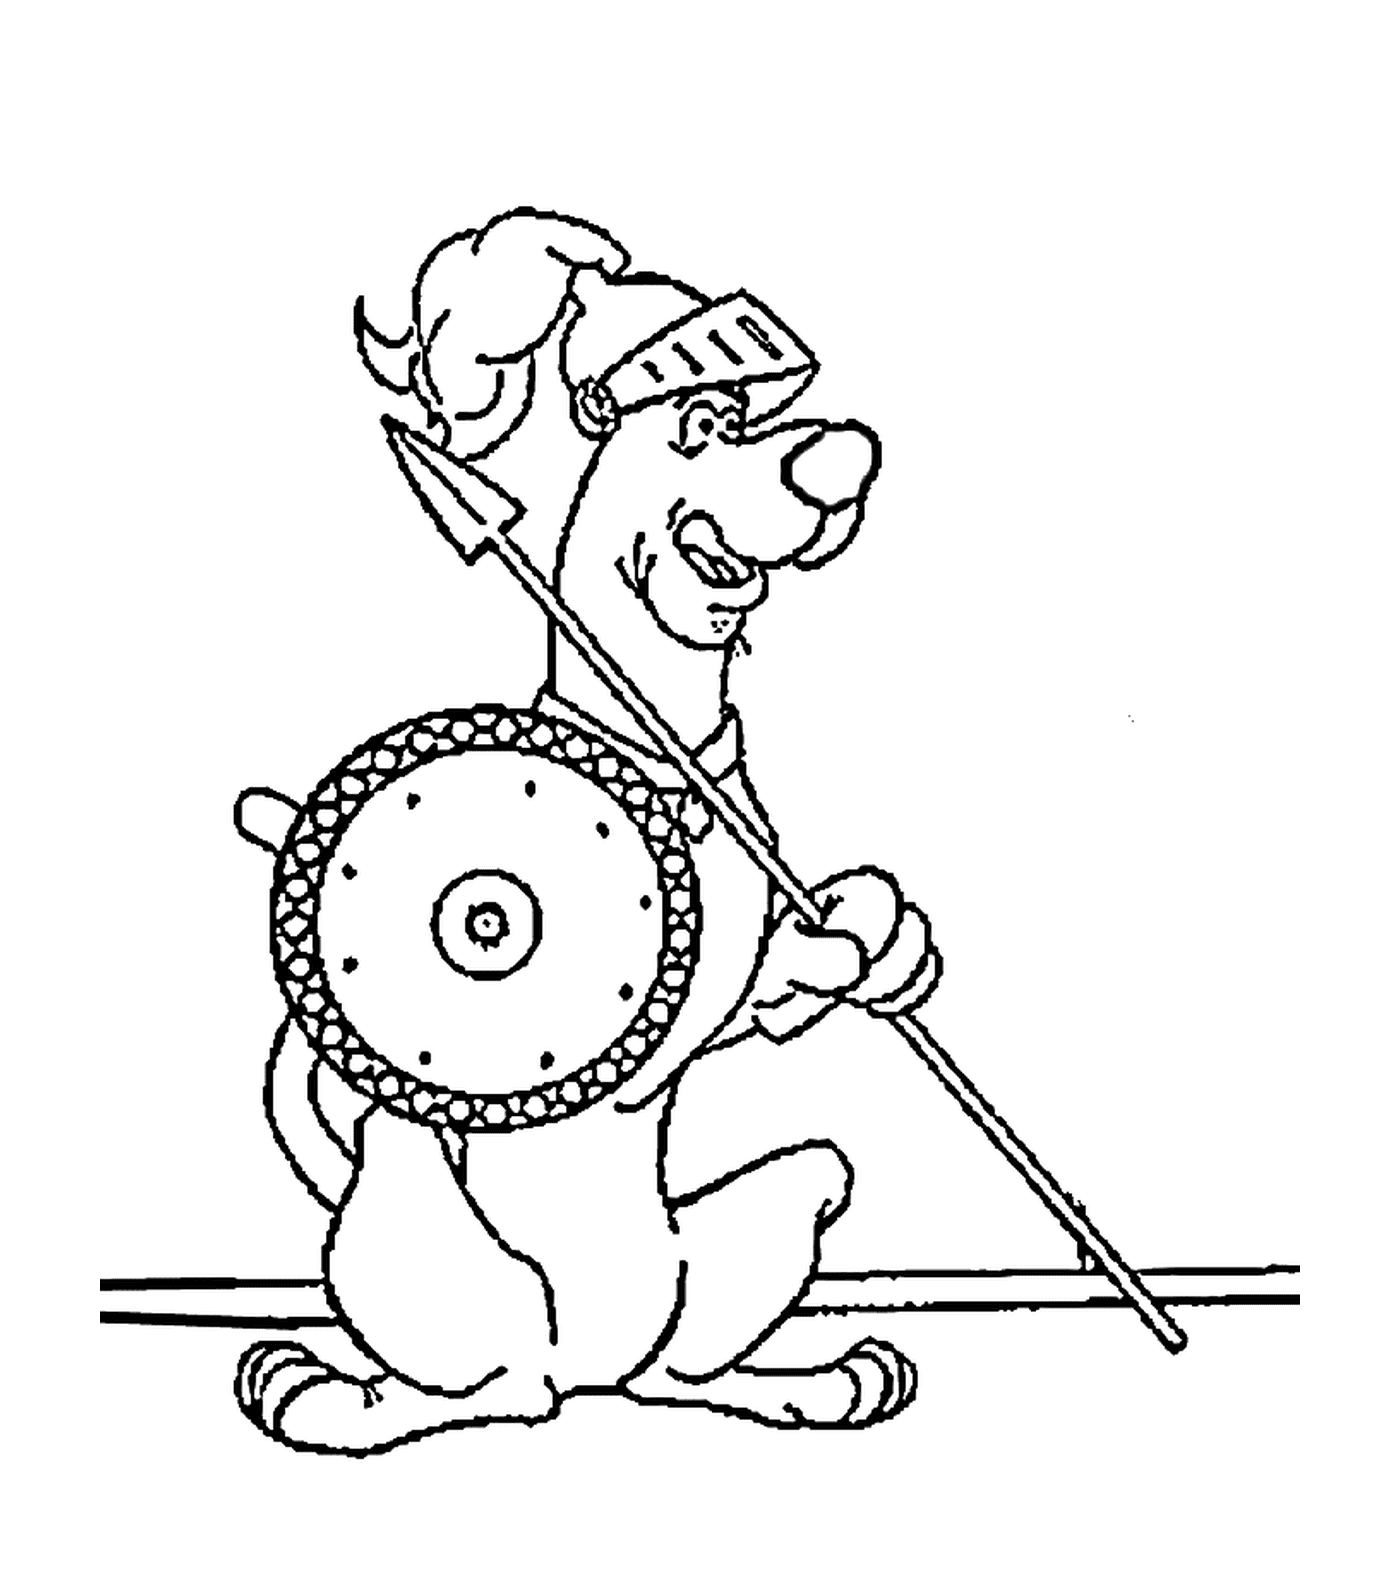  A dog holds a spear and a shield 